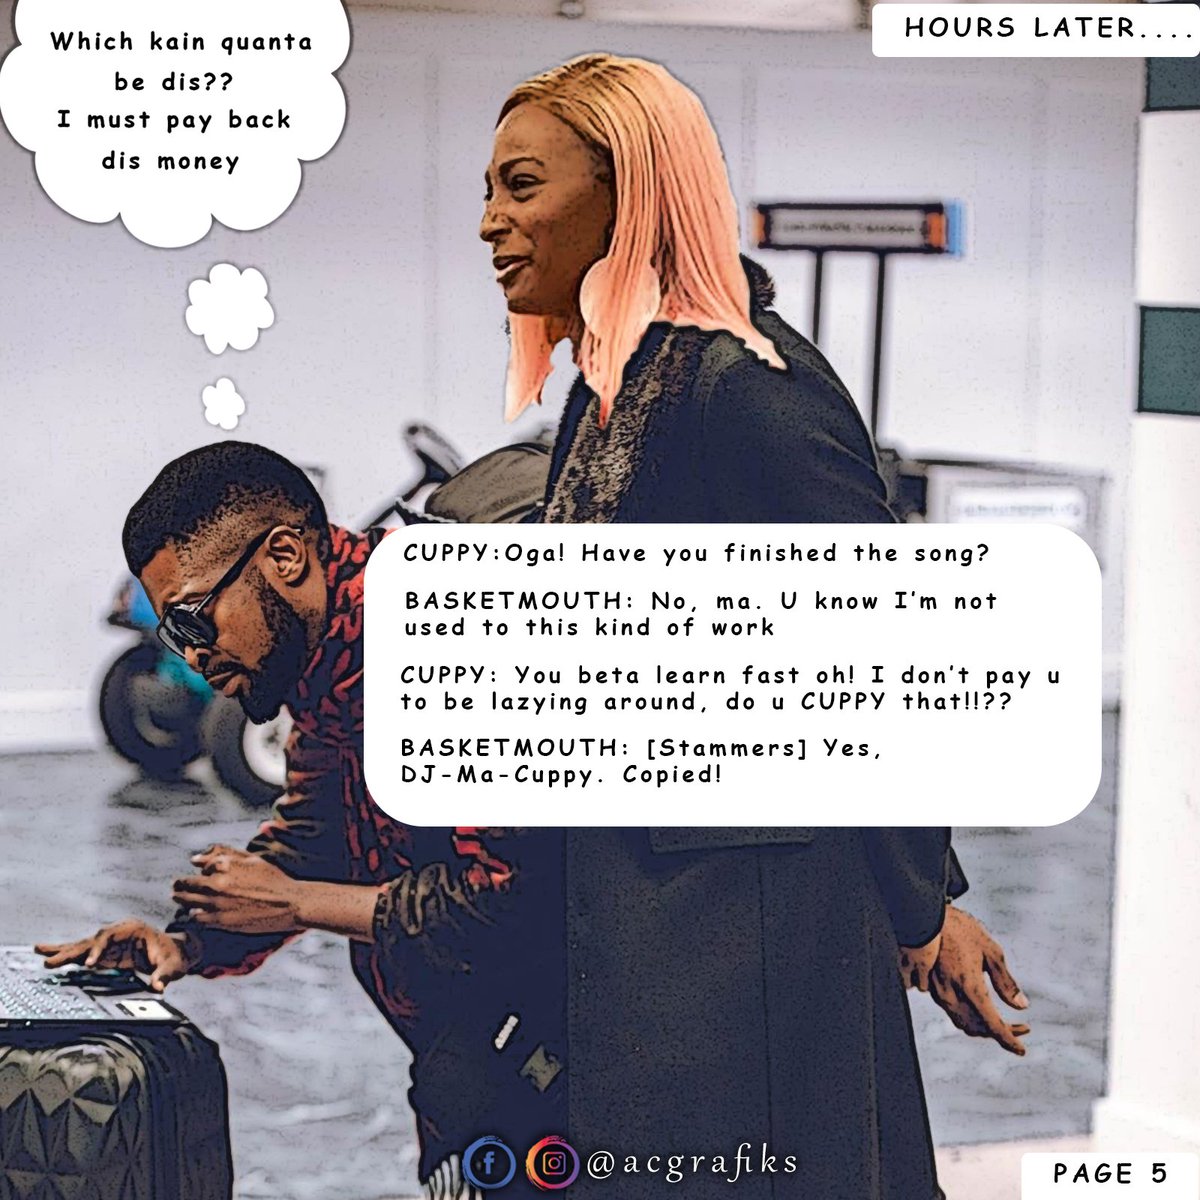 Stick to this threadSlide  and Read till the end. MANIPULATION SERIES: CELEBRITY HANGOUT SEASON FINALE feat.  @basket_mouth  @officialBovi  @cuppymusic"WHEN COMIC BOOK MEETS COMIC RELIEF" #ACeRChap  #ManipulationSeries